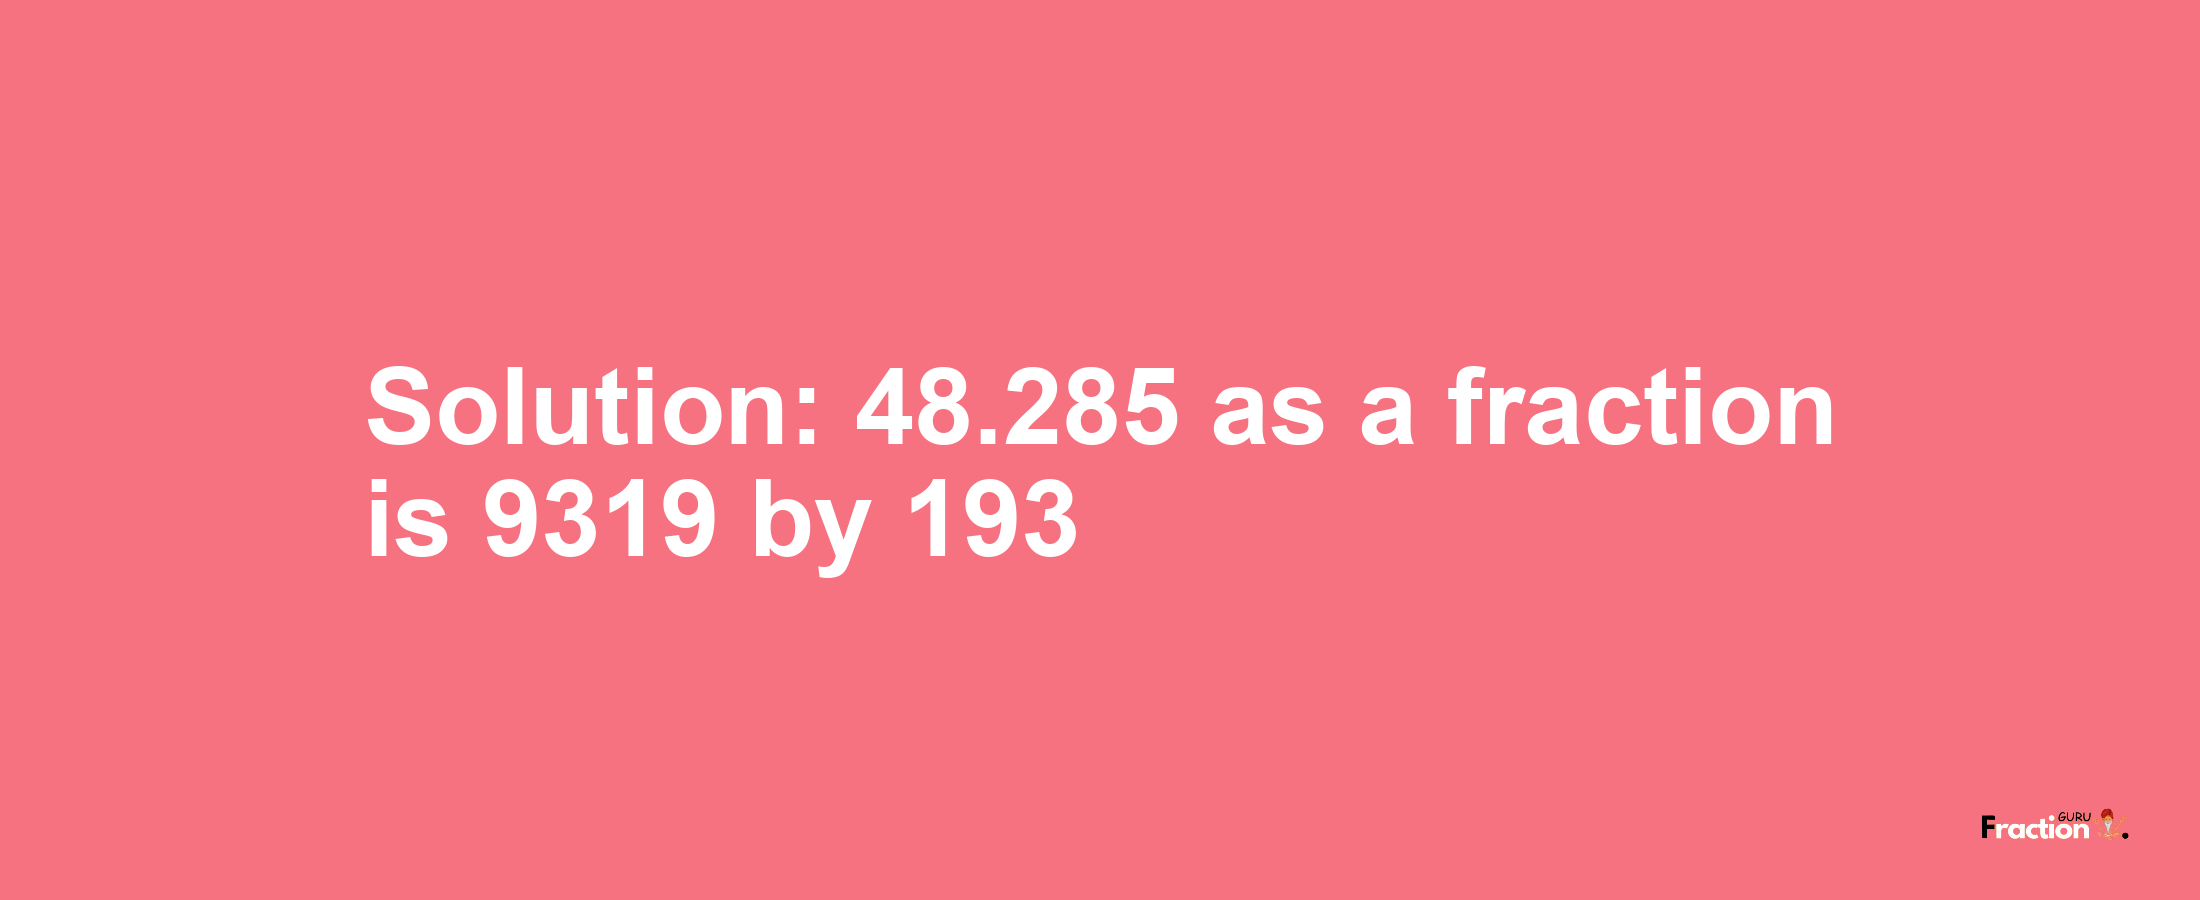 Solution:48.285 as a fraction is 9319/193